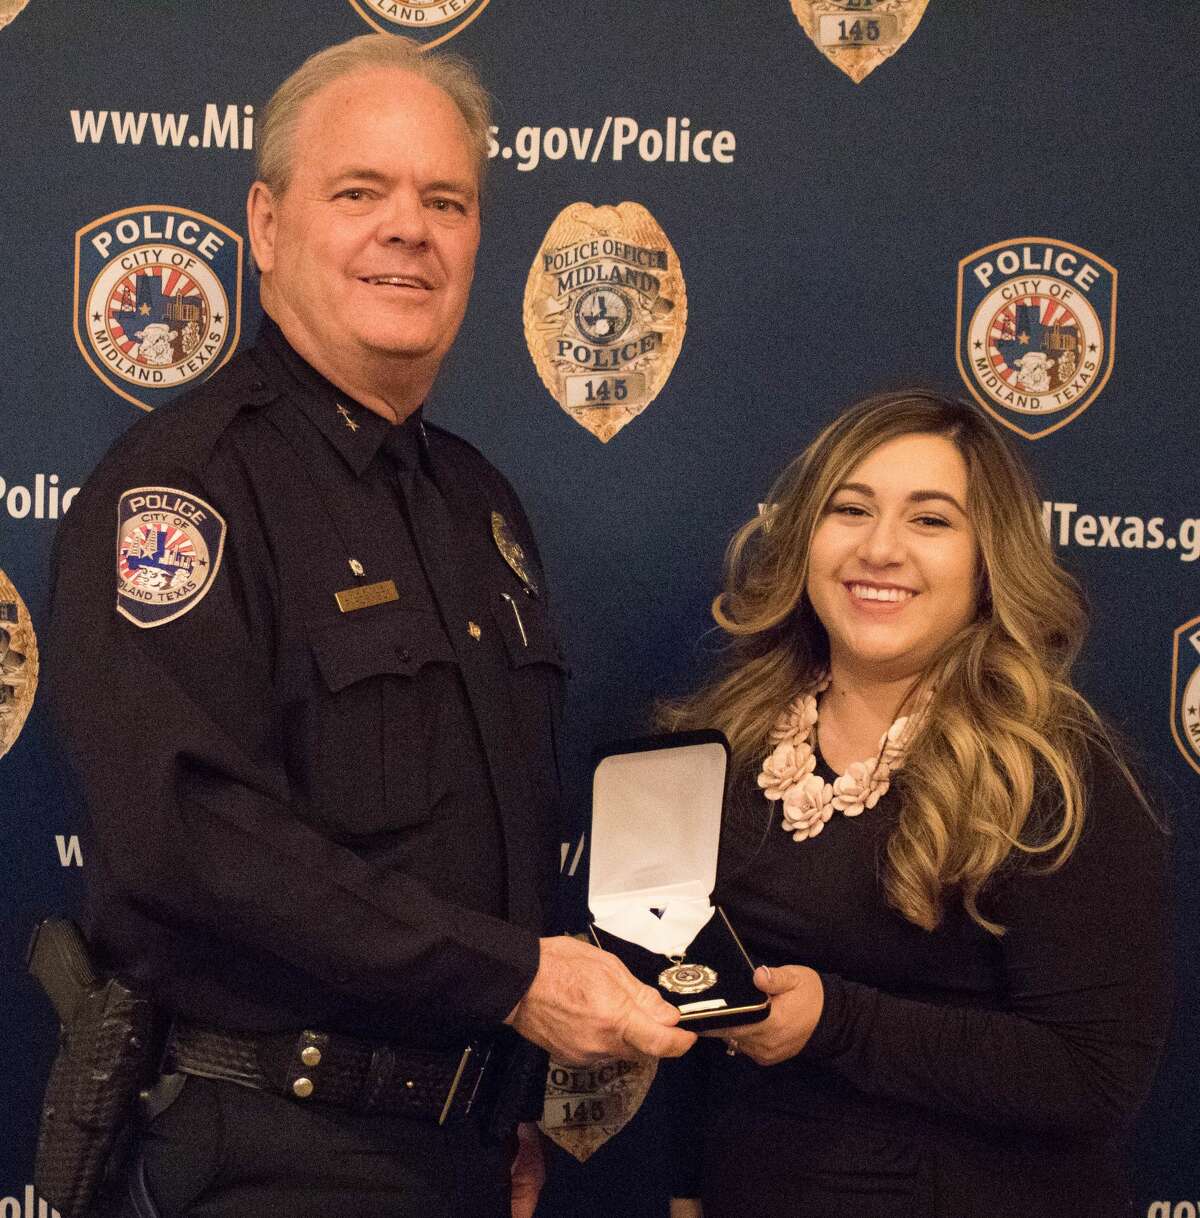 The Midland Police Department held its 25th annual awards banquet April 13  at Midland Country Club. Police Chief Price Robinson presents the Medal of Servce to Jessica Rodriguez. Other recipients were Lt. B.J. Land, Sgt. David Scardino, Detective Kay Therwanger and Officer Kenneth Callahan.